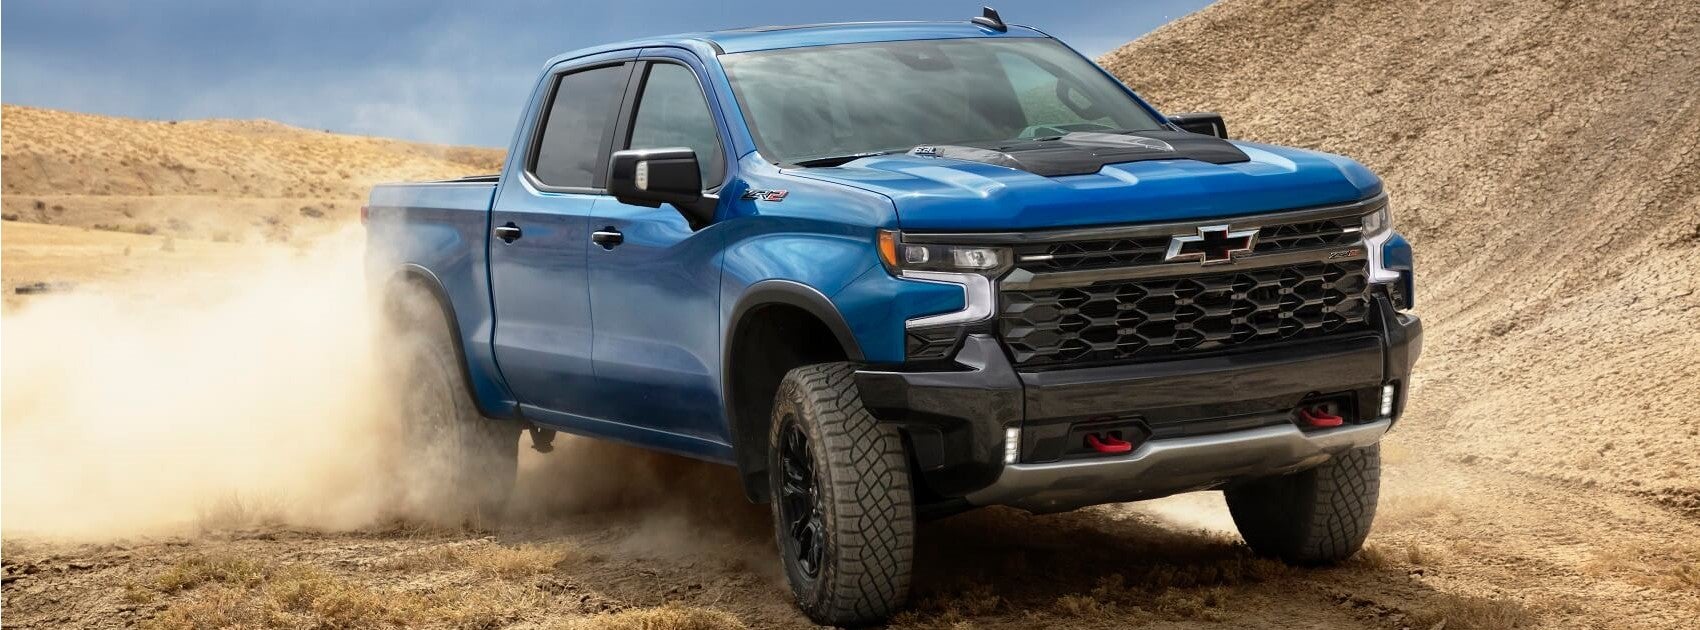 2022 Chevy Silverado in Blue on Dirt Snipped